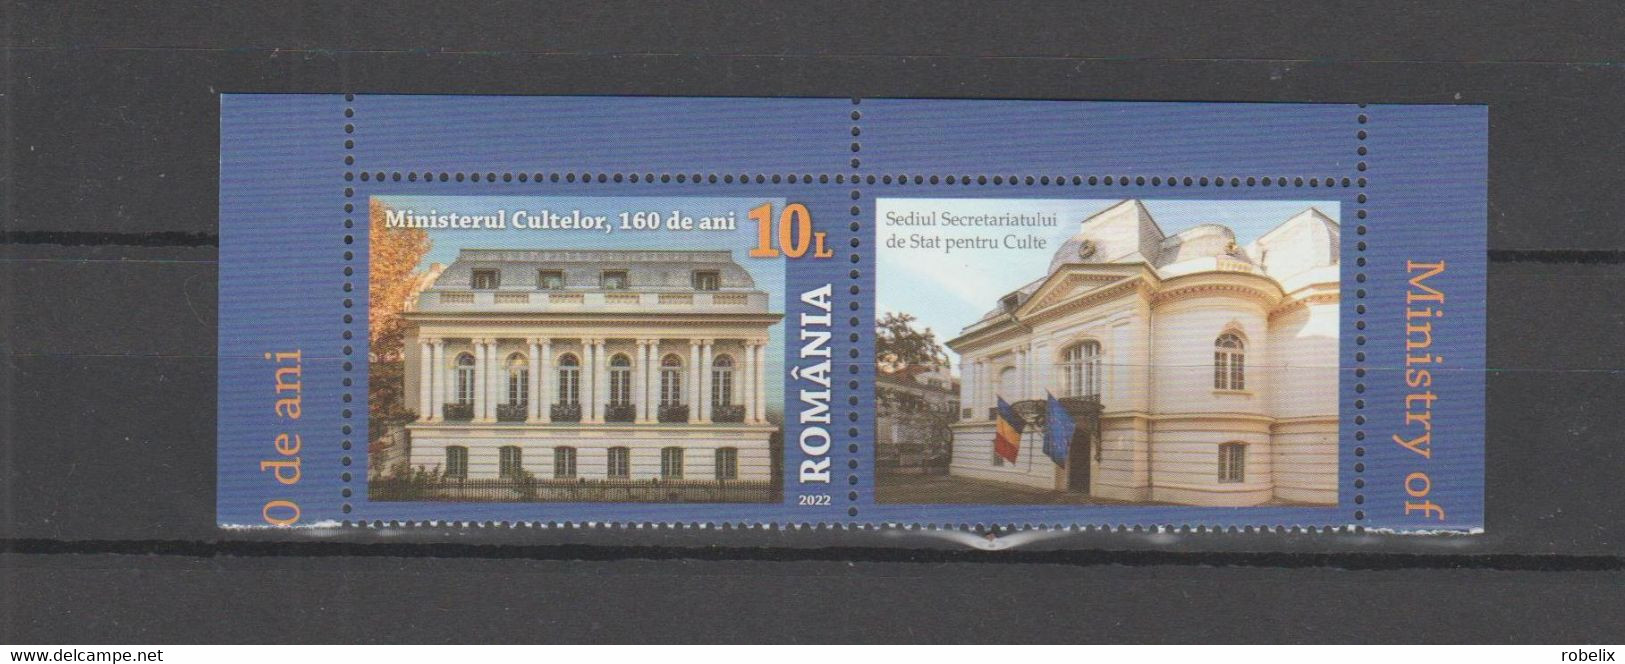 ROMANIA  2022  Ministry Of Religious Affairs, 160 Years - Set Of 1 Stamp With Label  MNH** - Nuevos